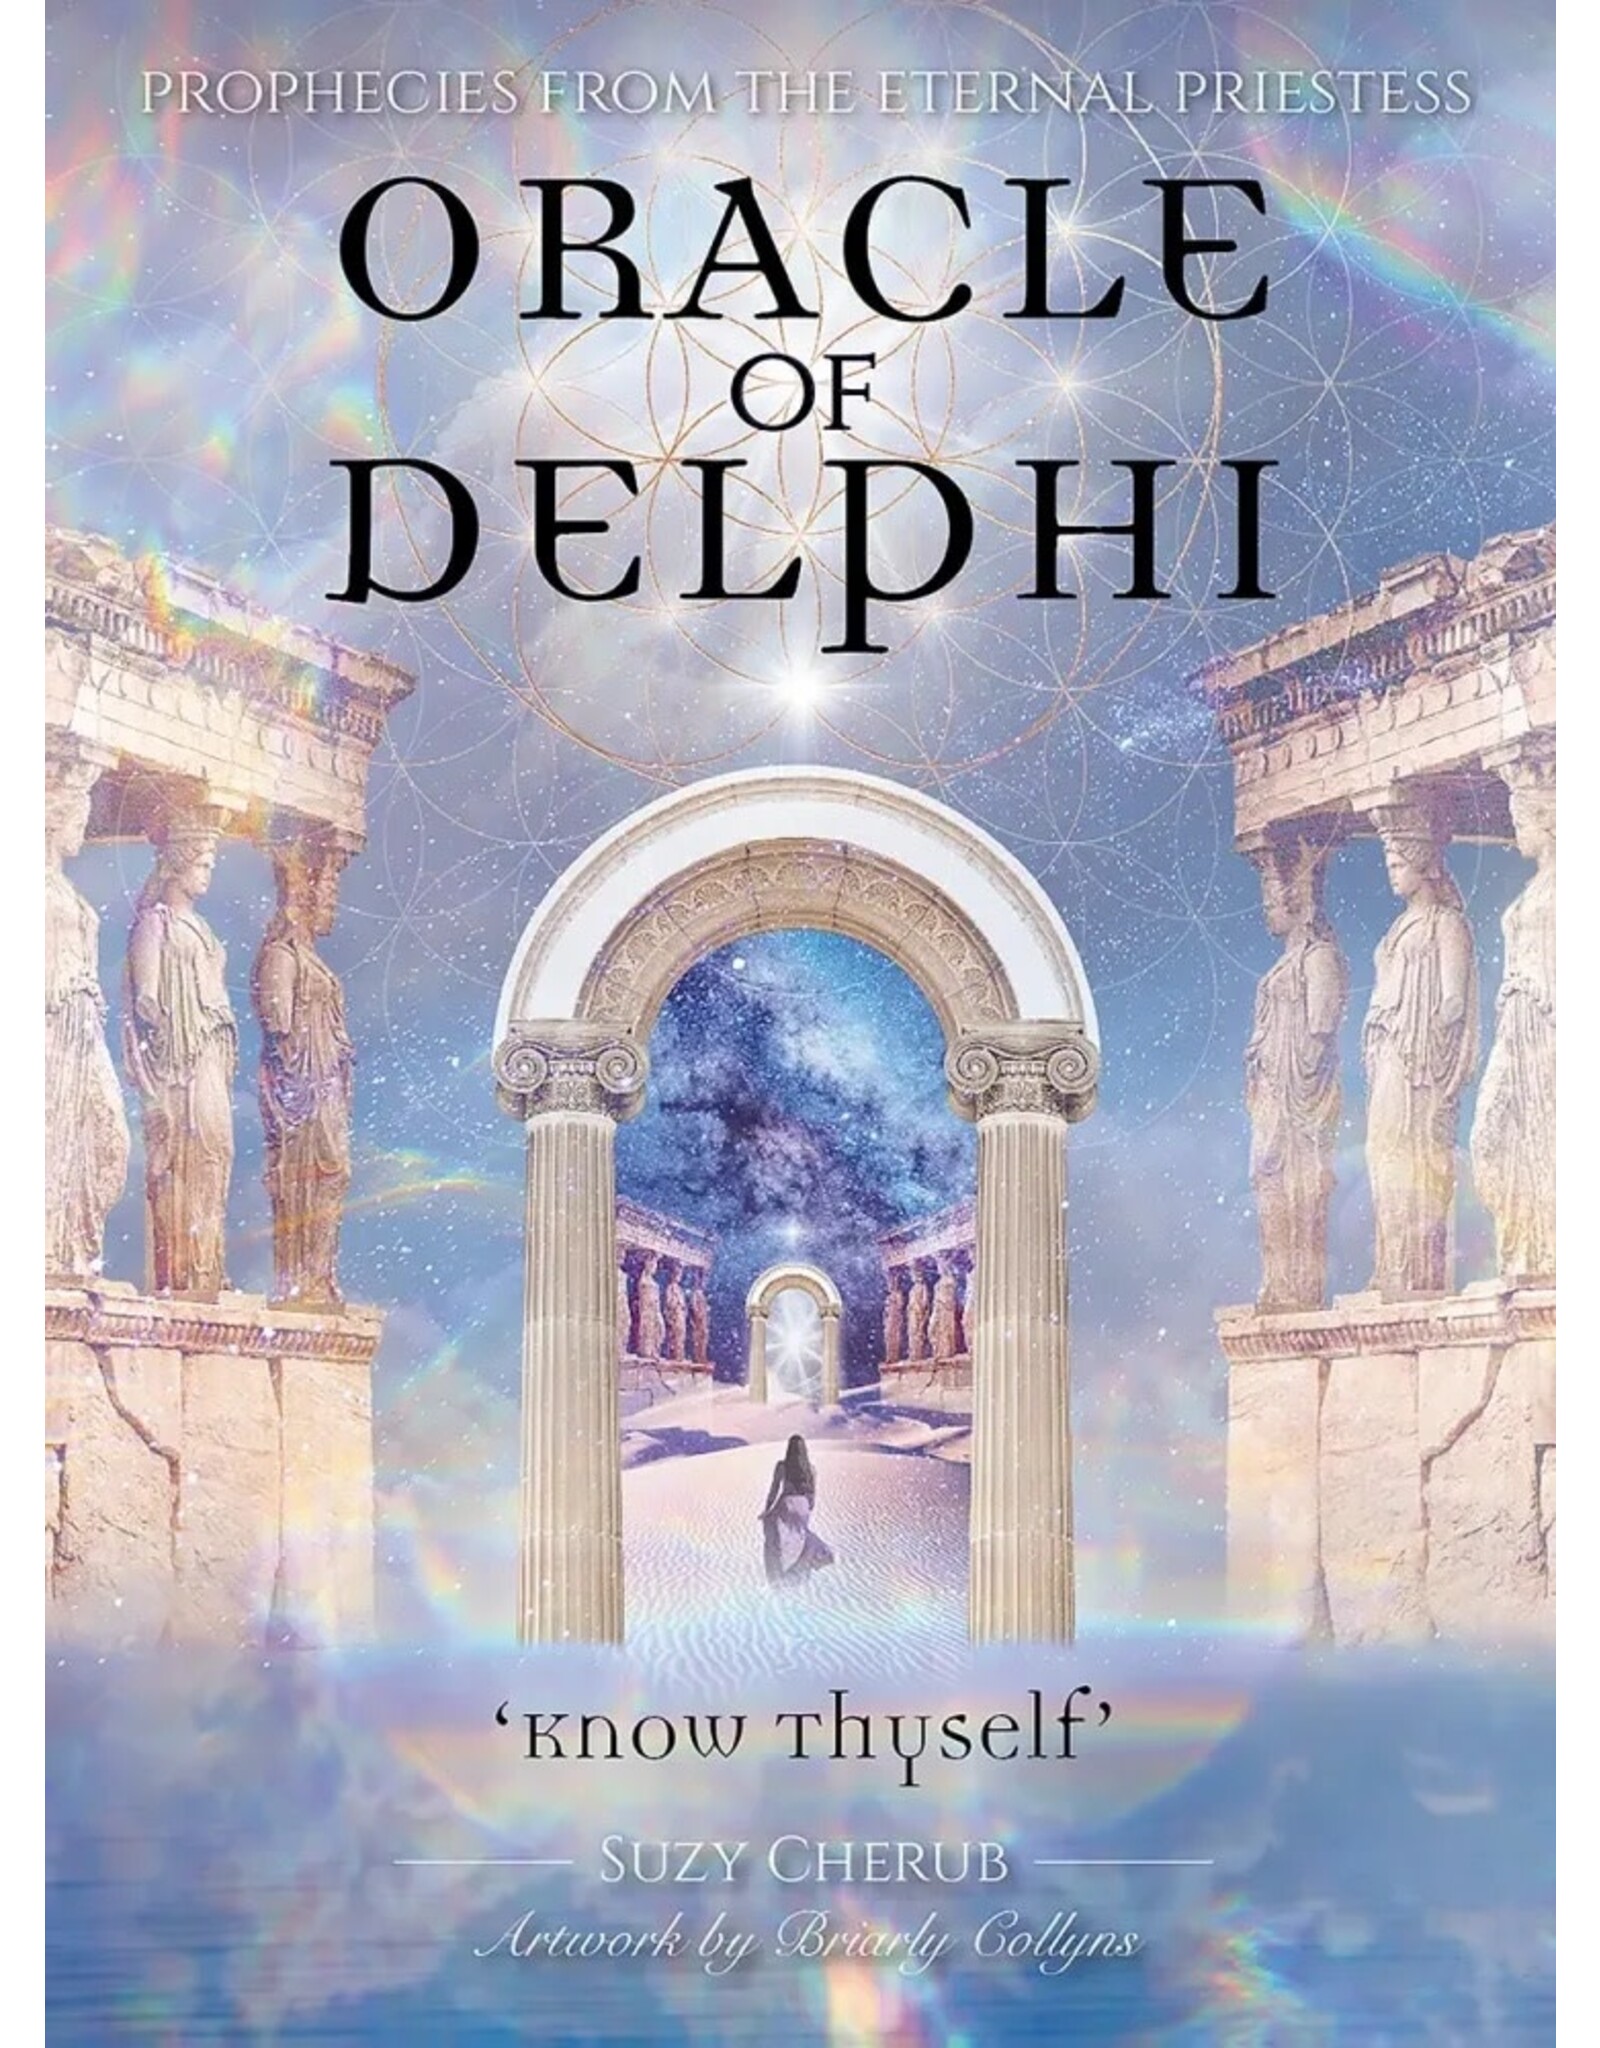 US Games Oracle of Delphi